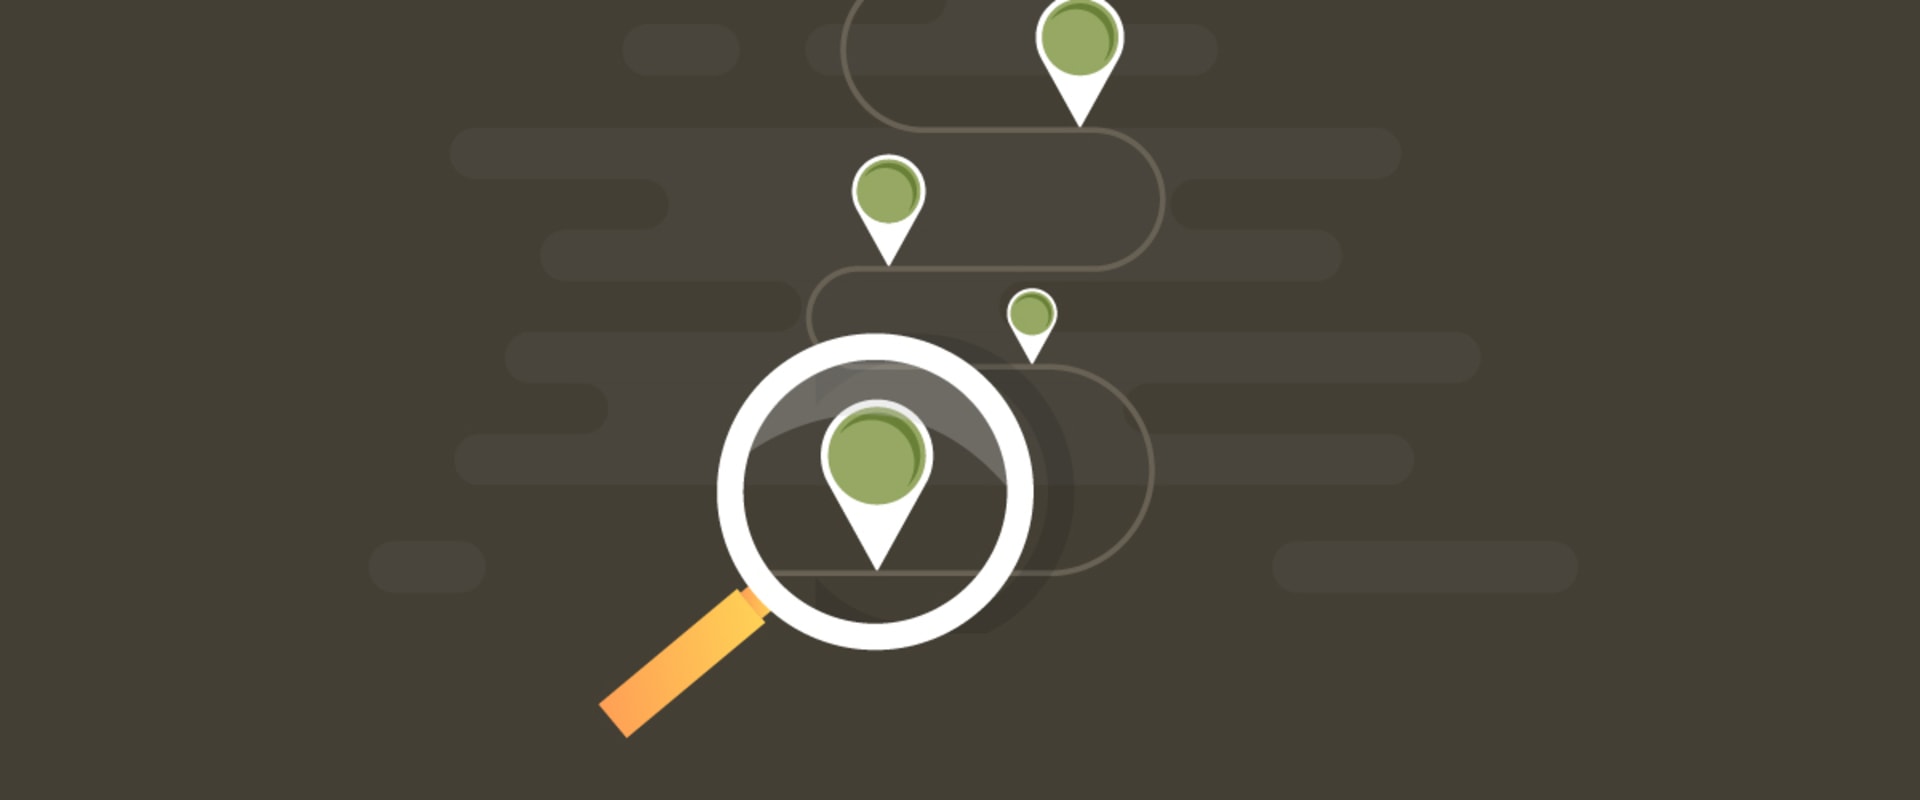 What should be consistent in local seo strategy?